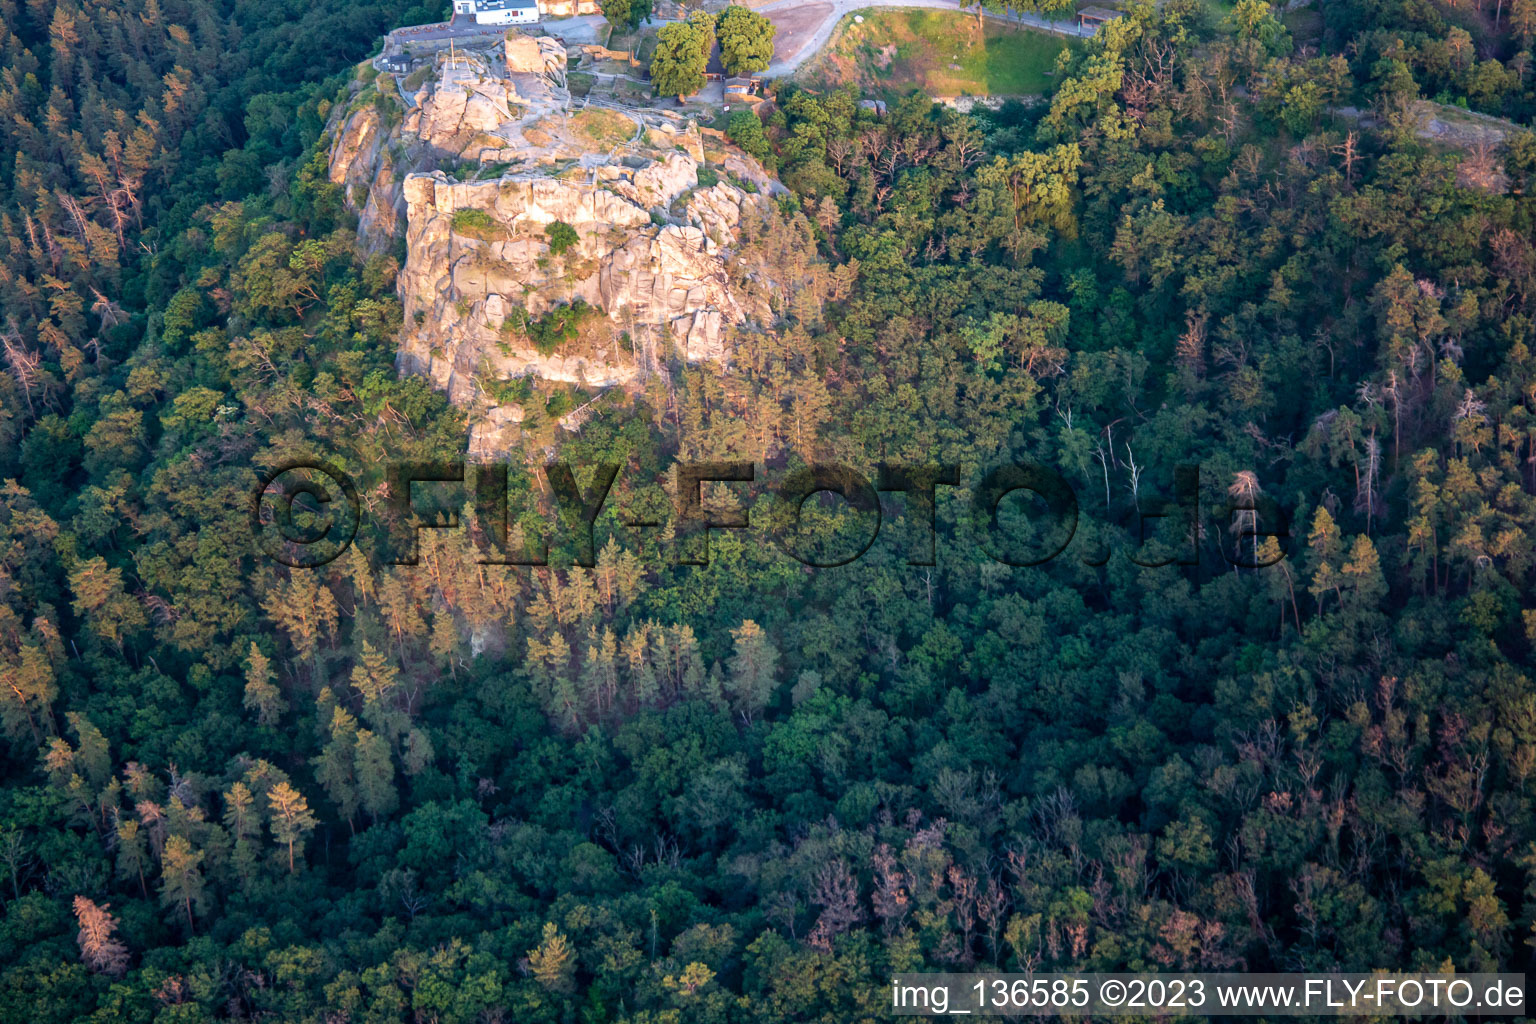 Regenstein Castle and Fortress in Blankenburg in the state Saxony-Anhalt, Germany from the plane